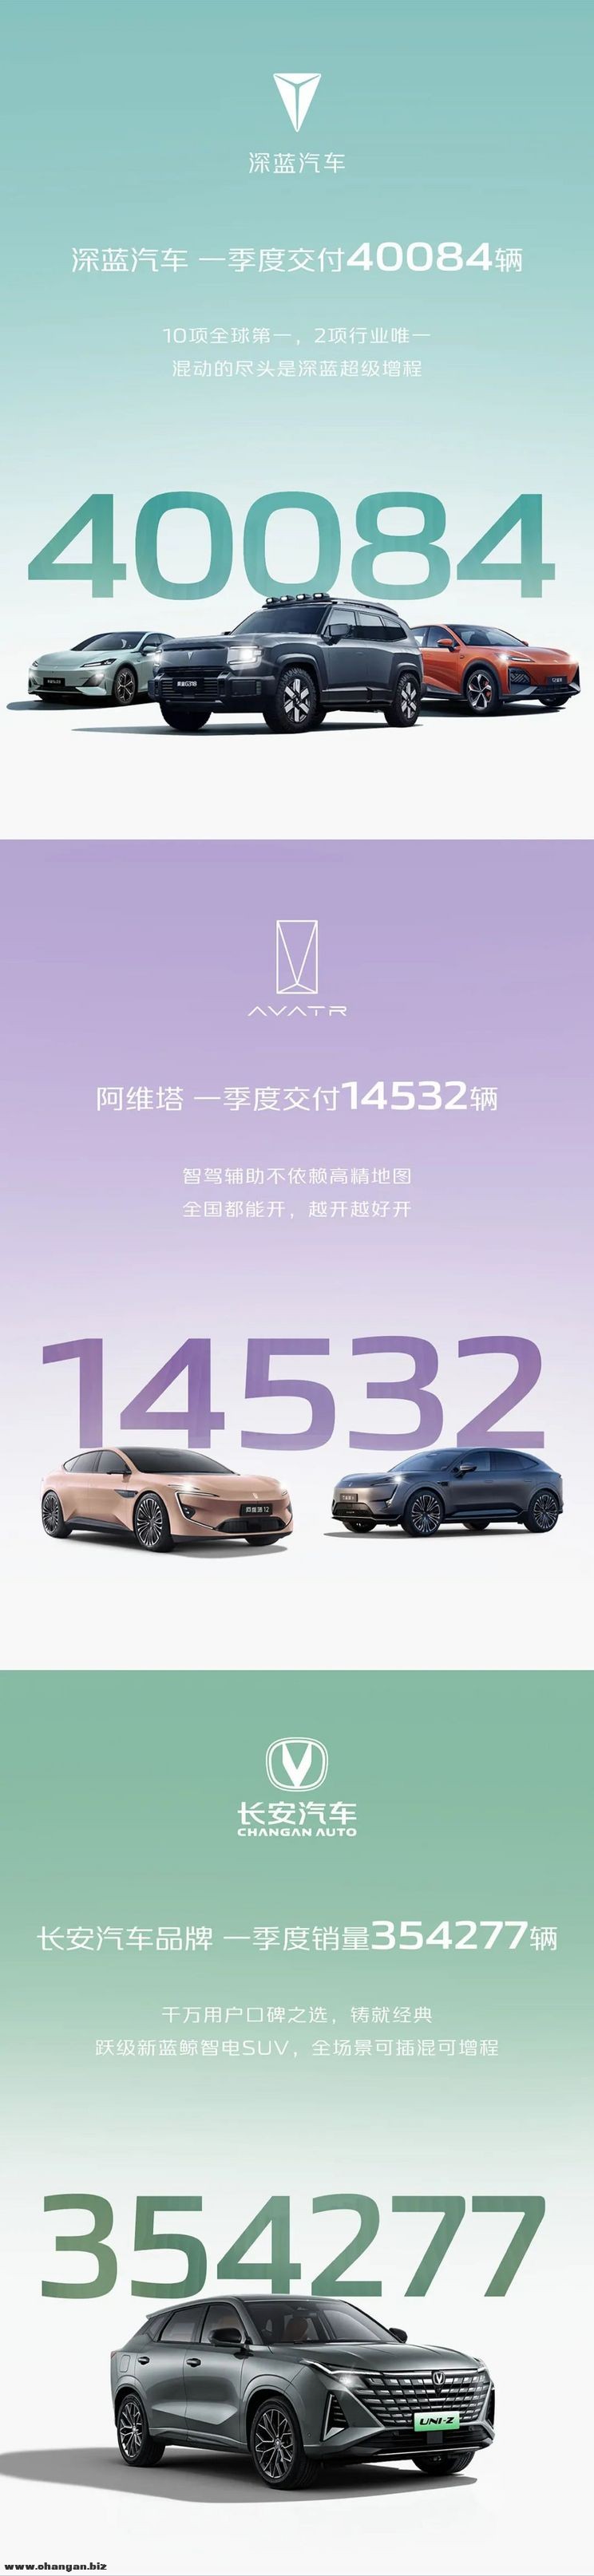  The sales volume of Chang'an Automobile in the first quarter increased by 13.9% year on year